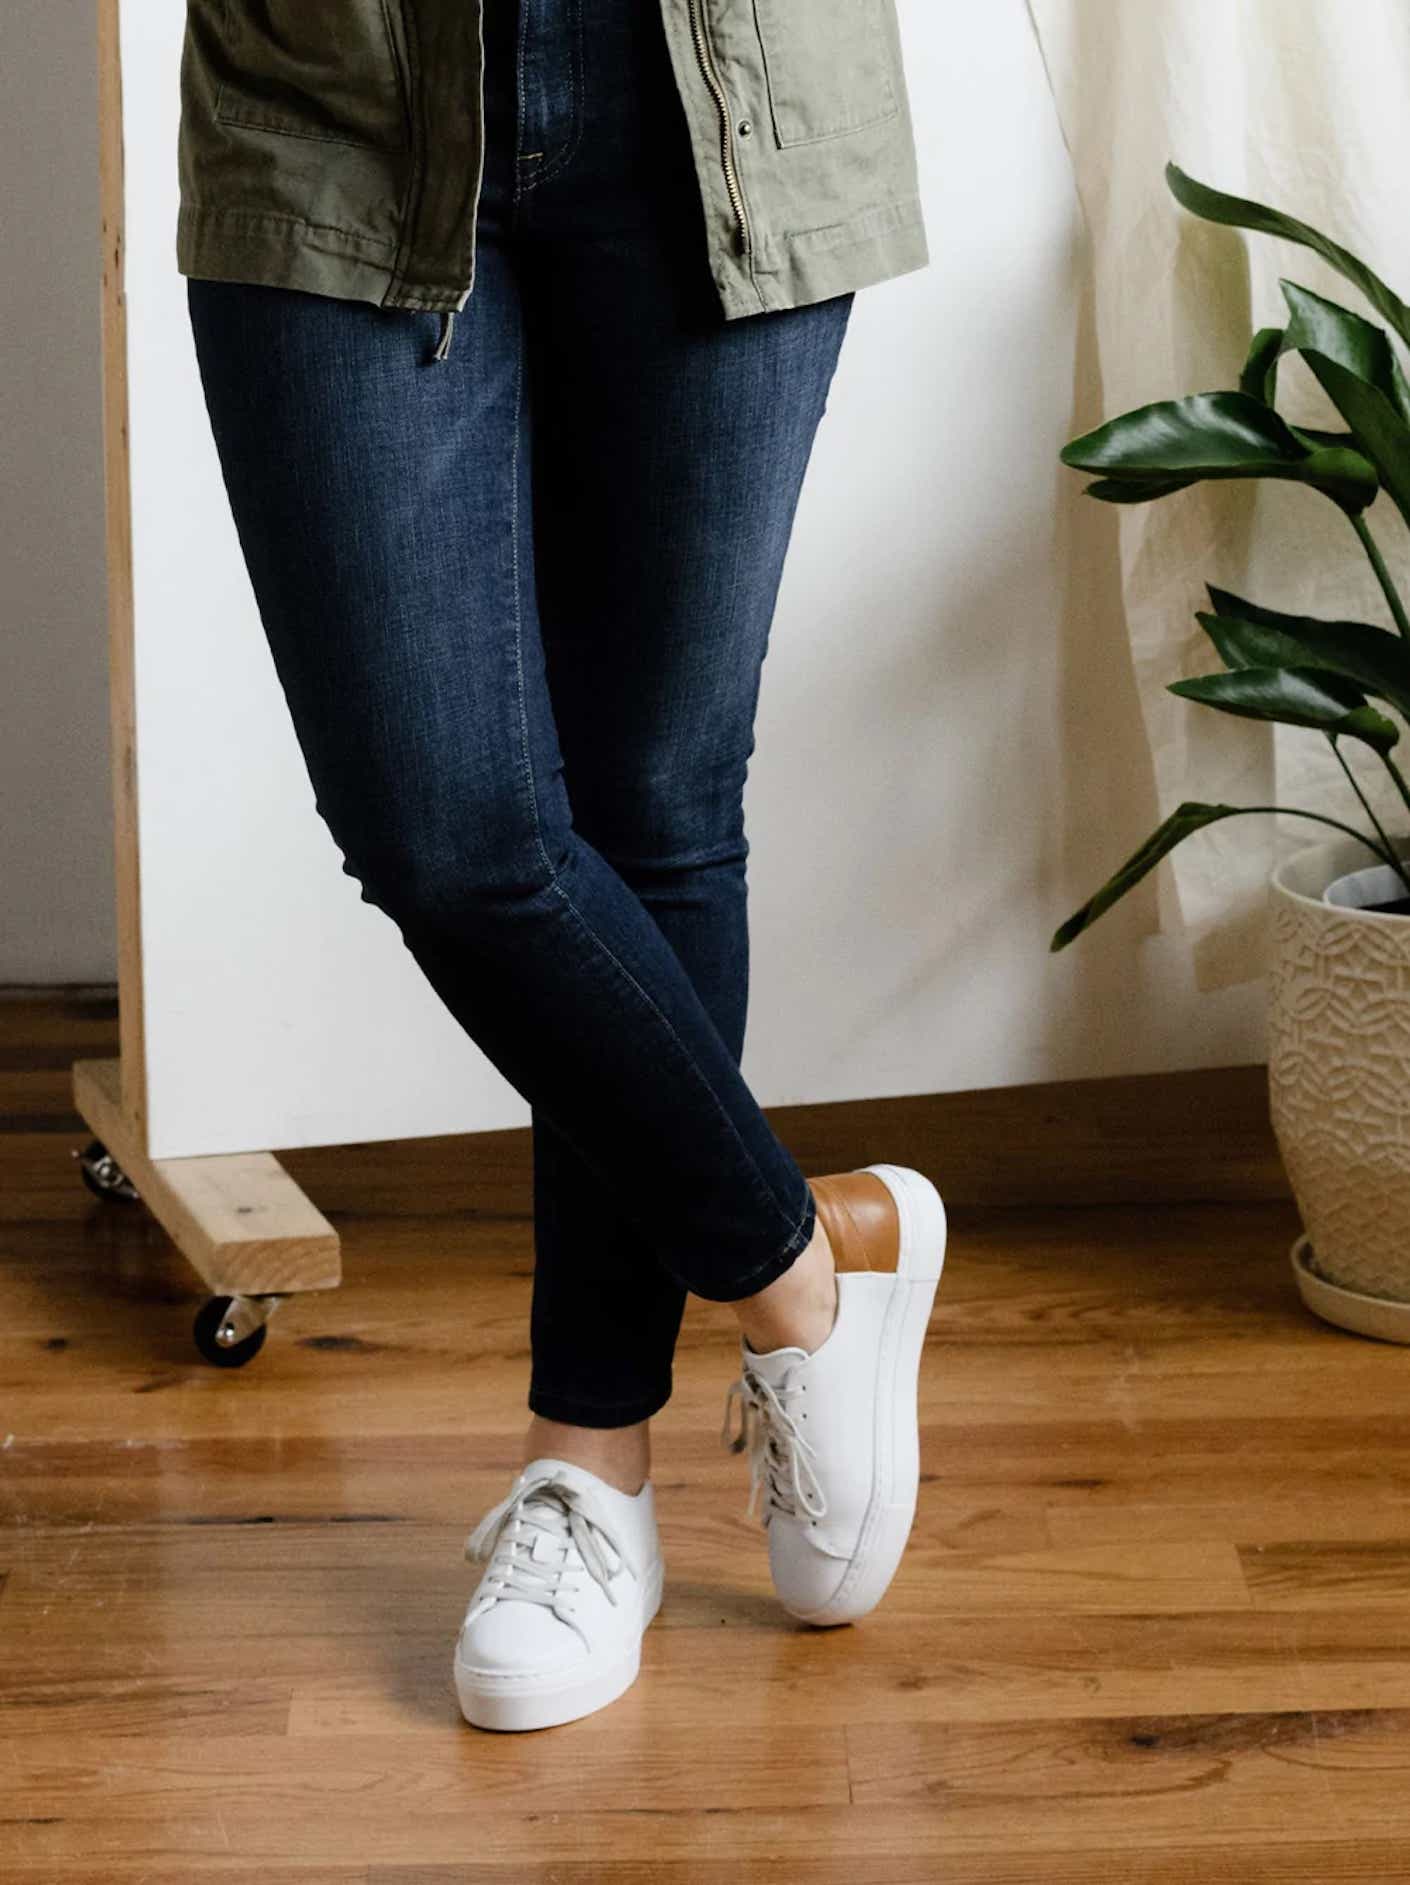 A person wears a pair of white sneakers with leather accents on a hardwood floor, next to a green plant.